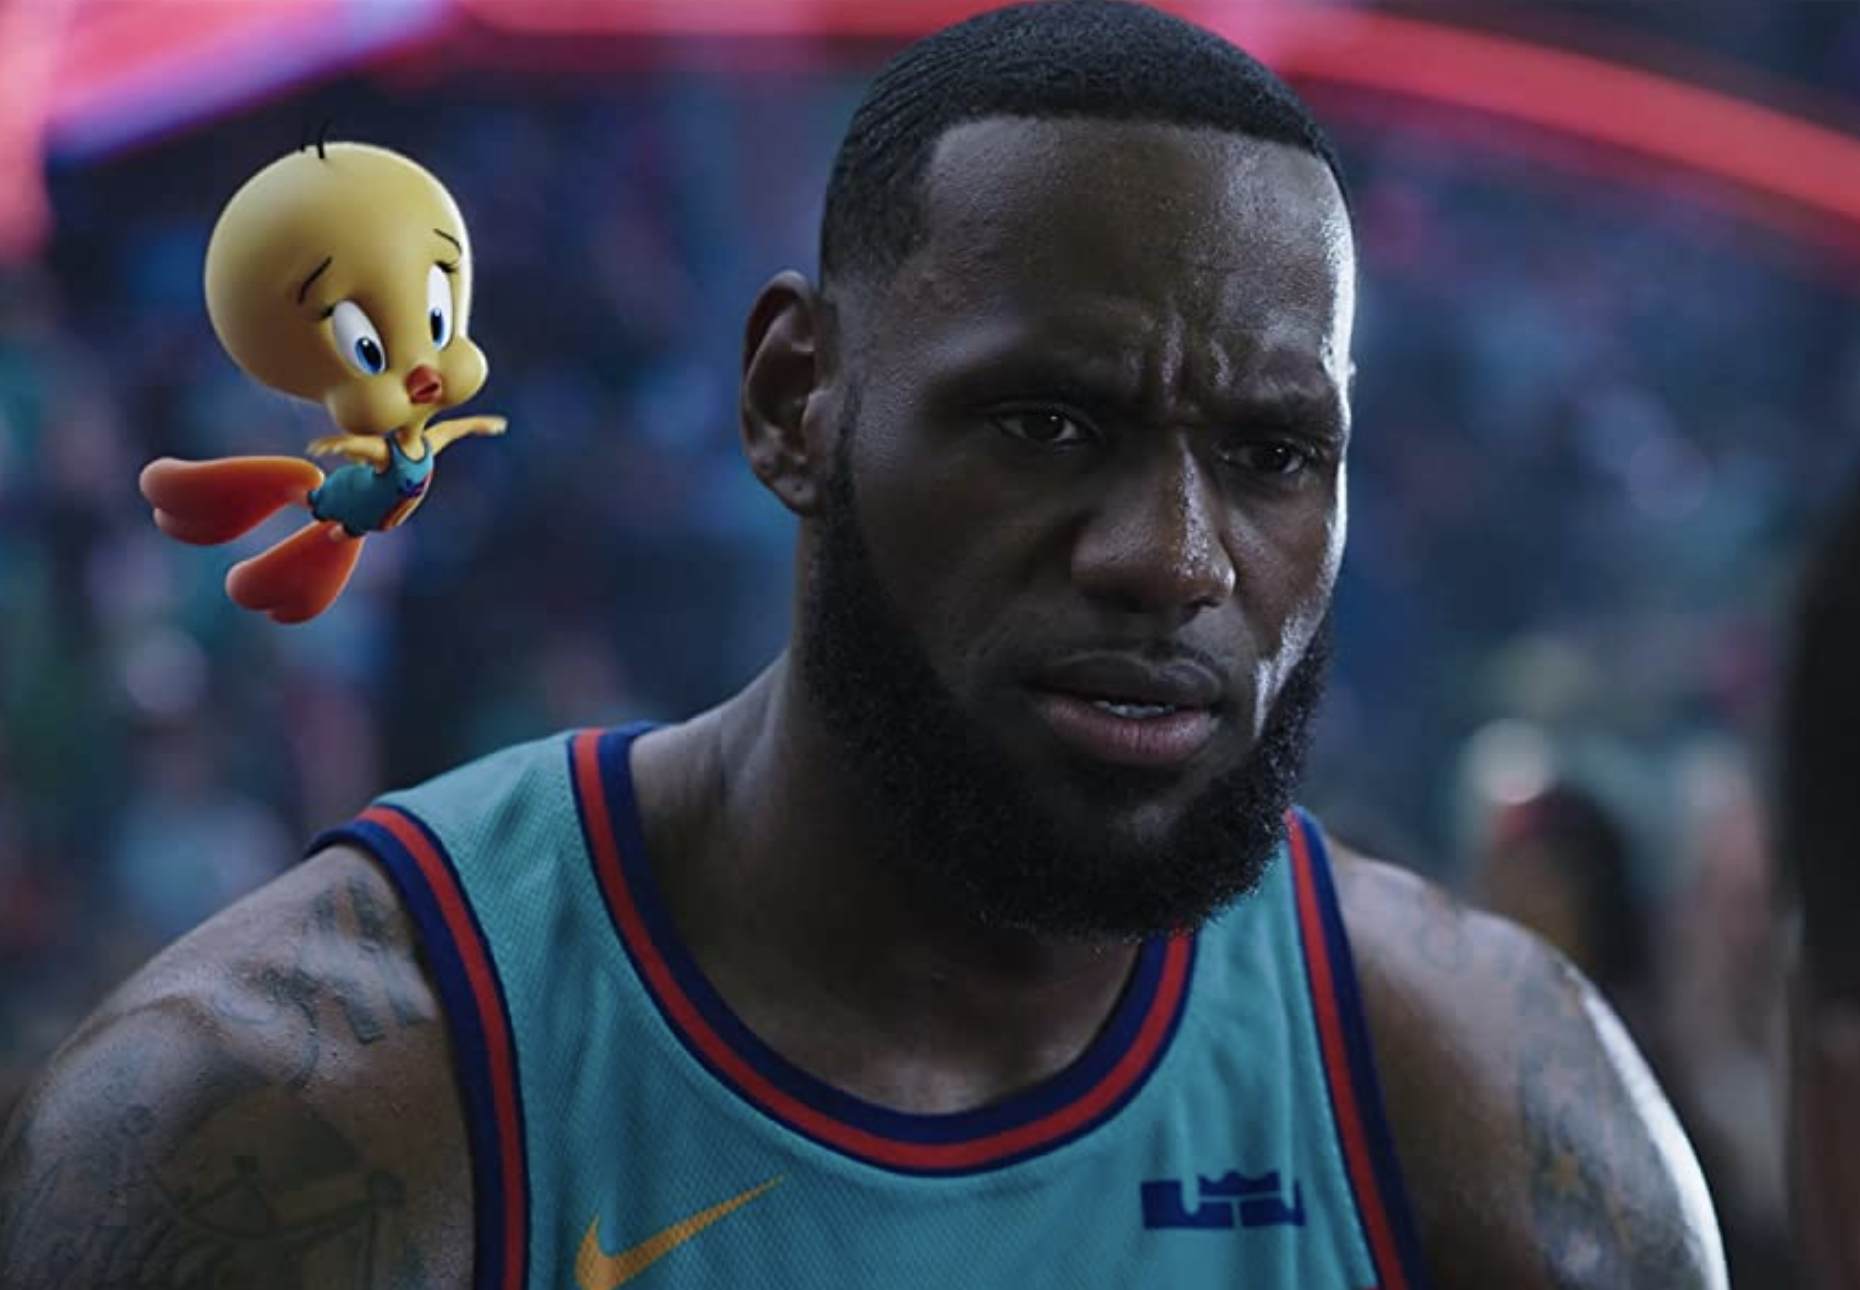 Looney Tunes: Warner Bros Should Retire Characters After Space Jam 2